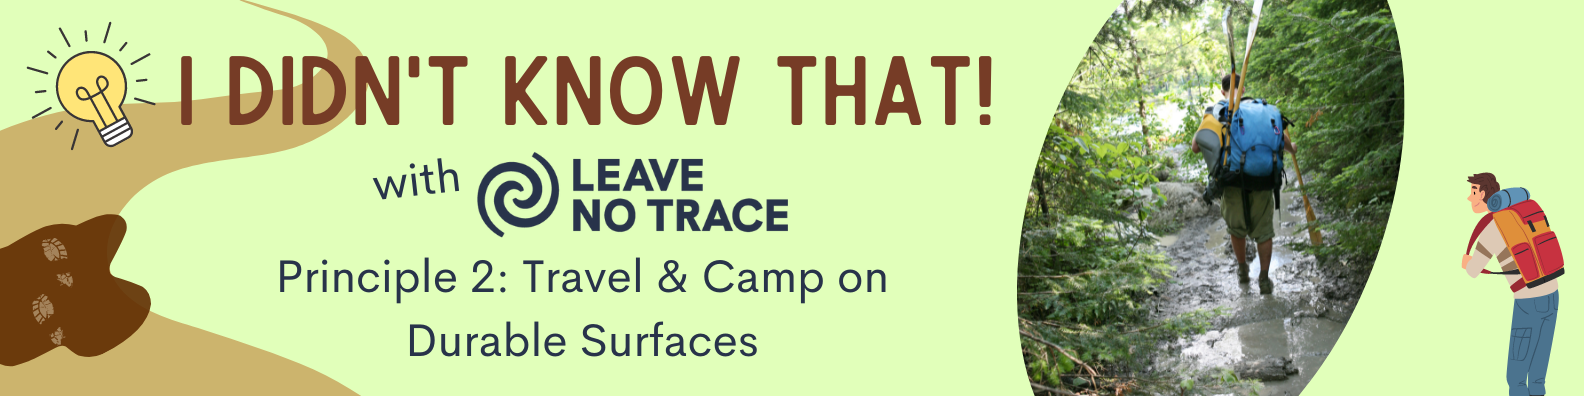 article banner for I Didn't Know That! with Leave No Trace Principle 2: Travel & Camp on Durable Surfaces